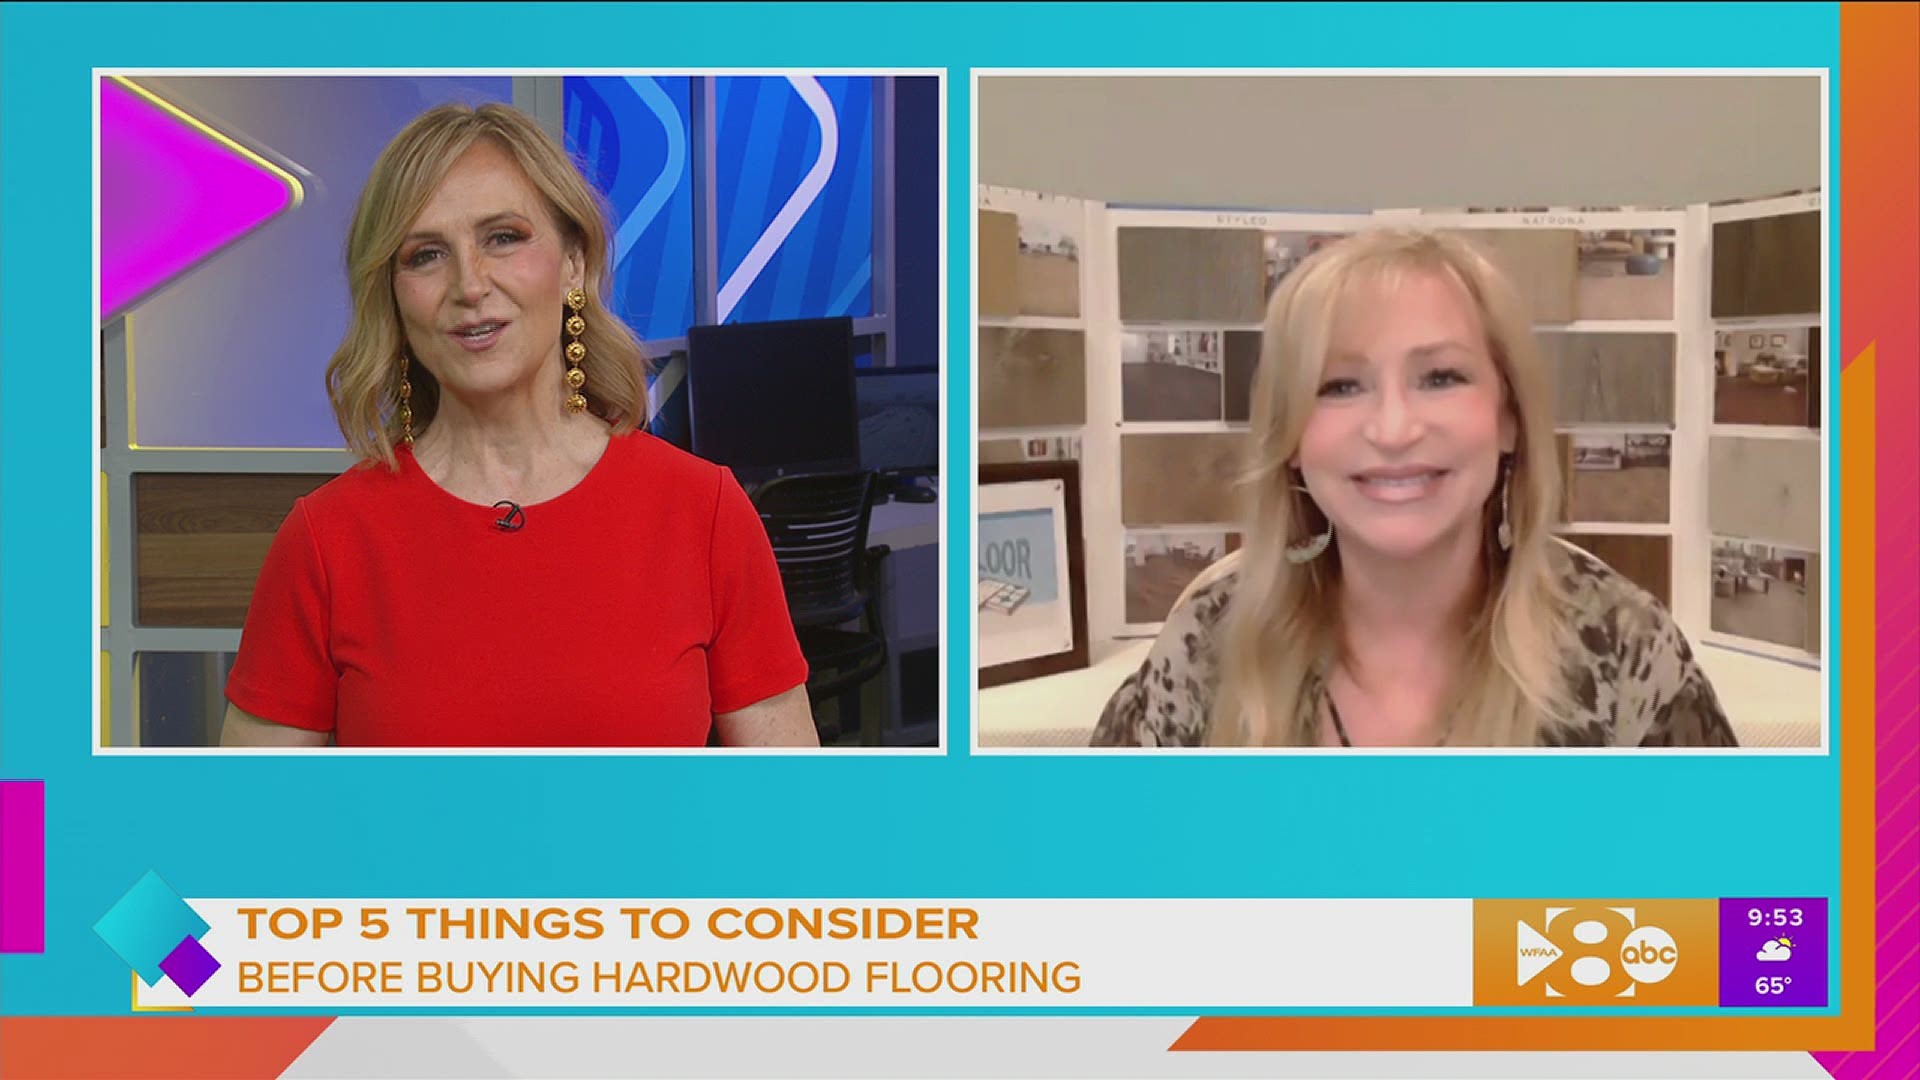 What you should consider before buying hardwood flooring